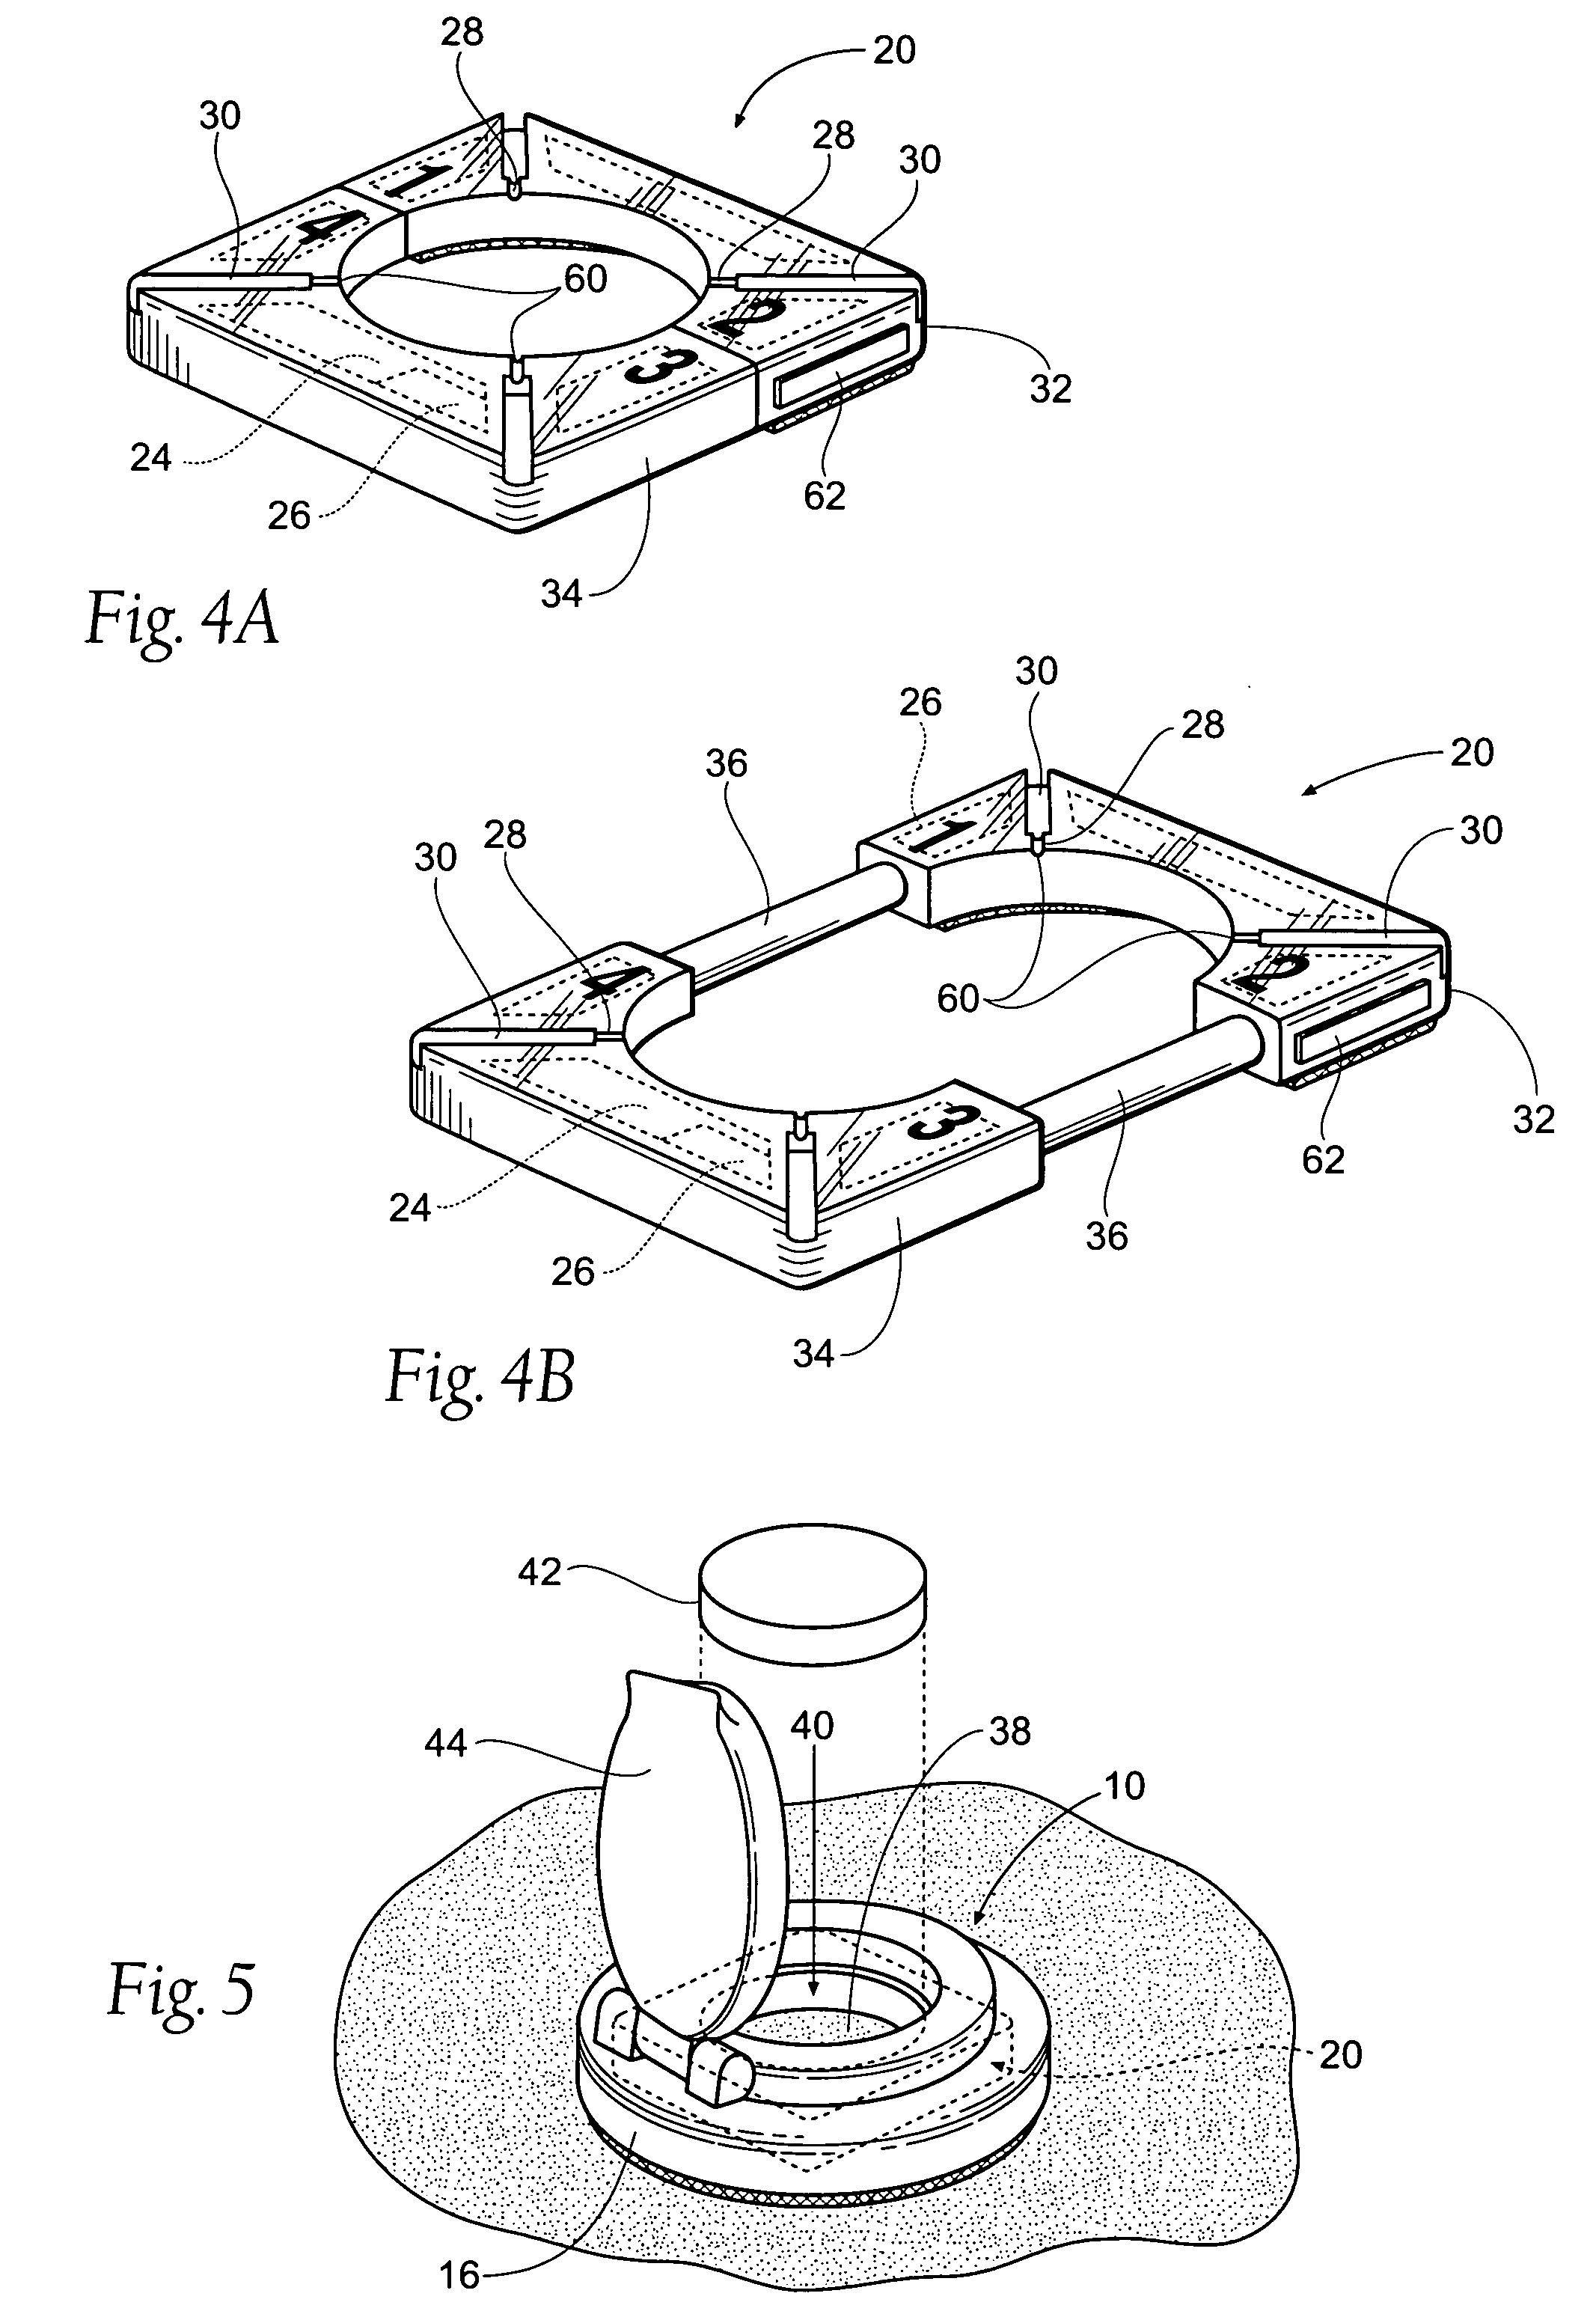 Percutaneous electrode assemblies, systems, and methods for providing highly selective functional or therapeutic neuromuscular stimulation